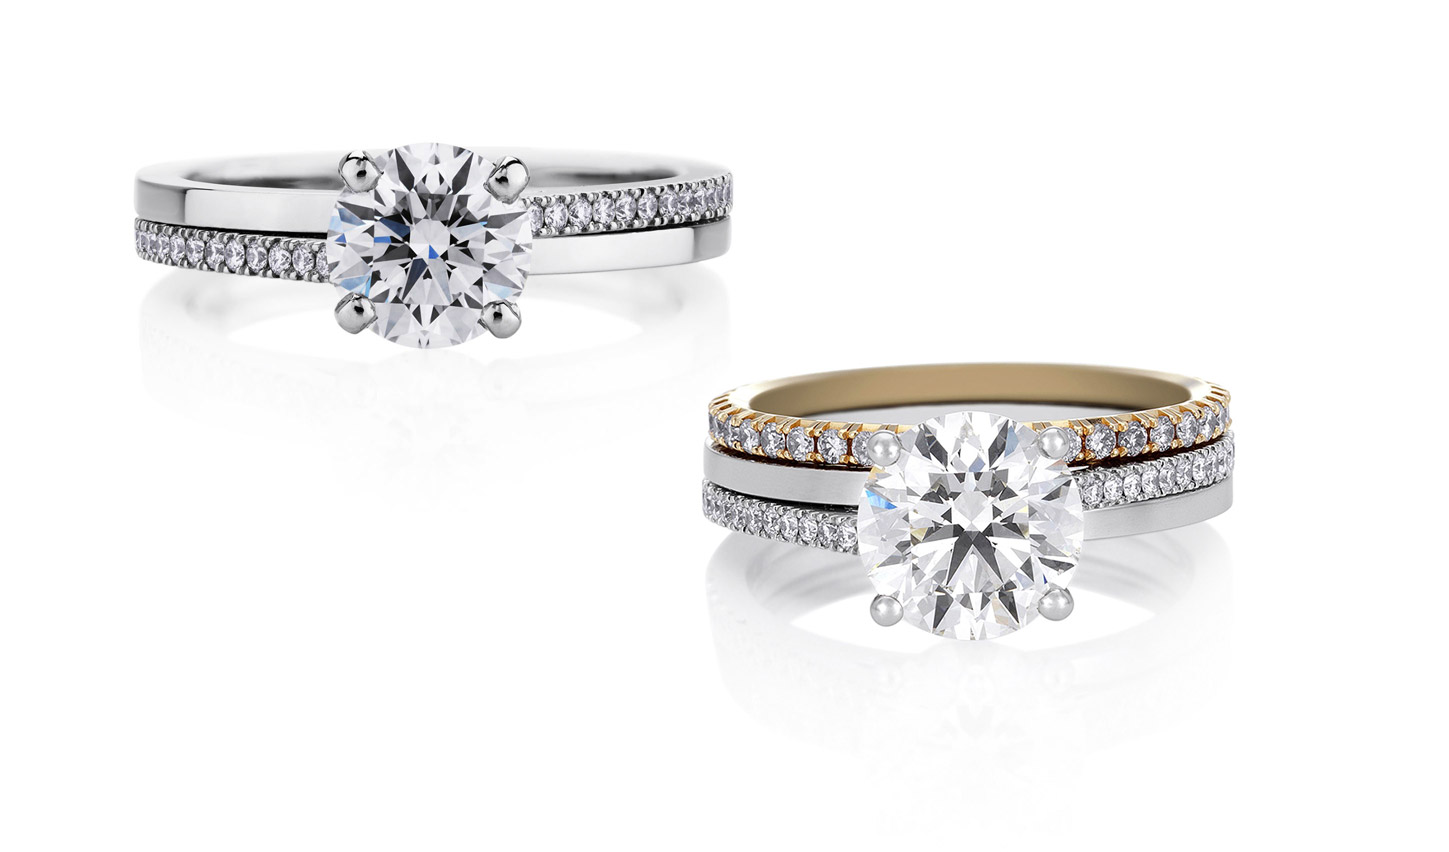 De Beers 'Promise' diamond engagement rings in white and yellow gold